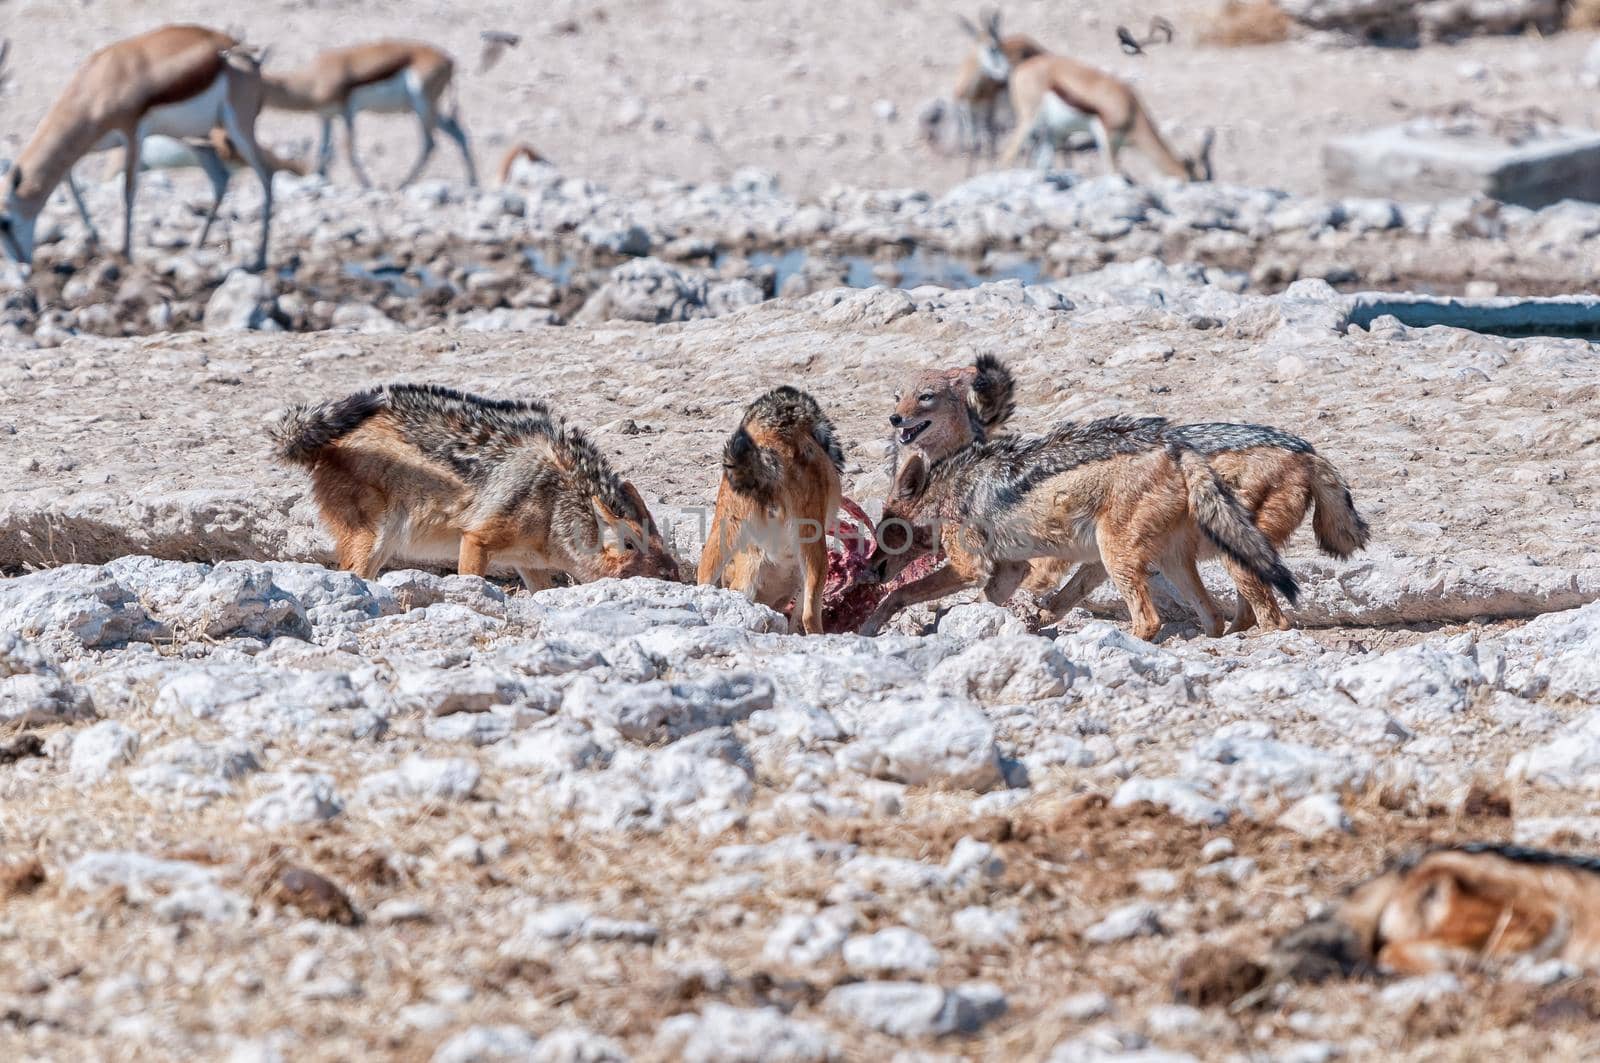 A pack of black-backed jackal, Canis mesomelas, feasting on a carcass